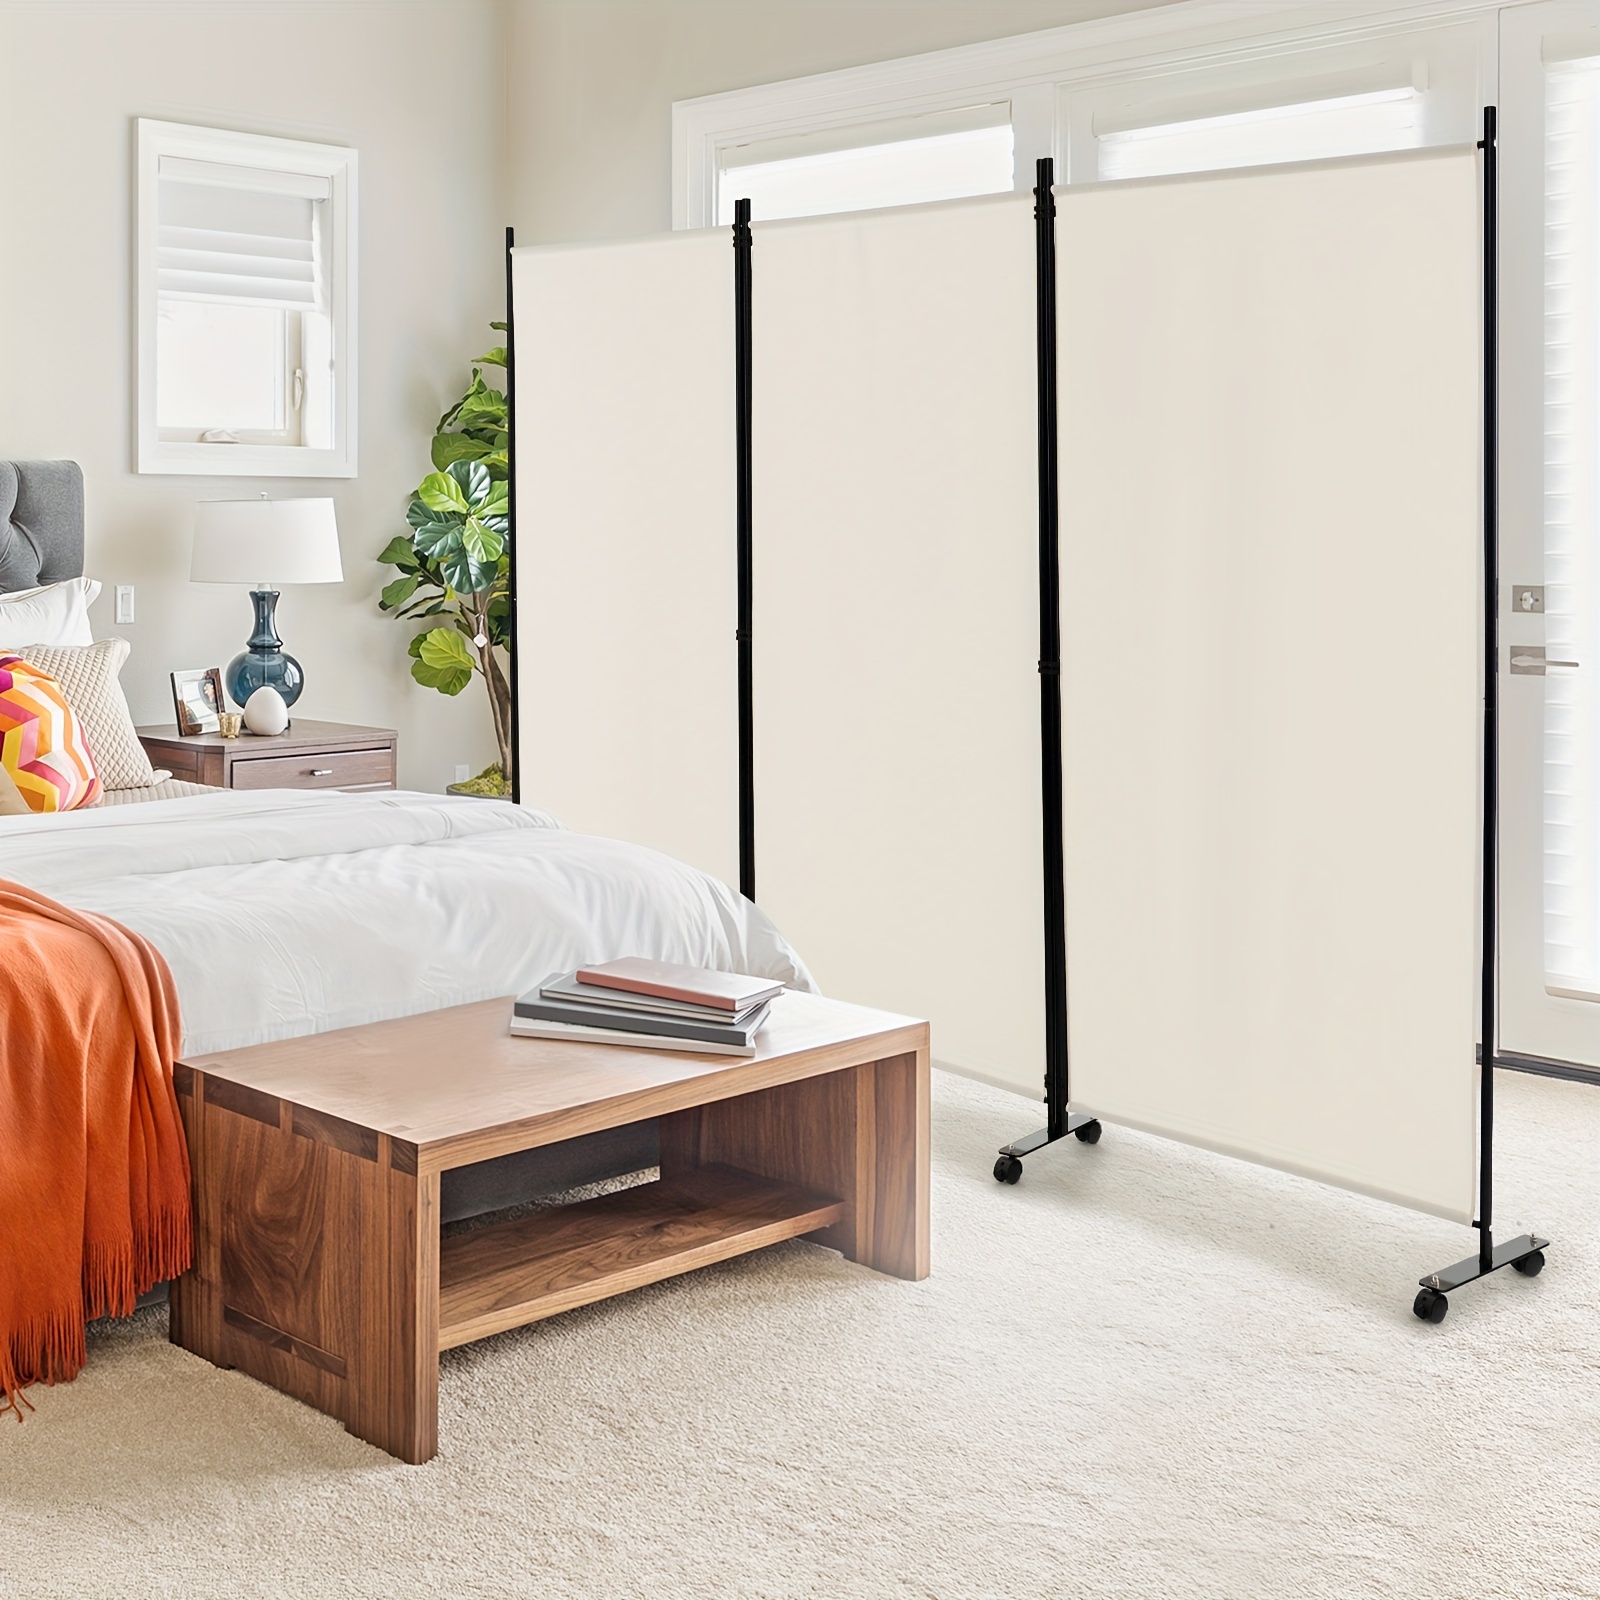 

1pc 3-panel Wood Room Divider, 6.5ft Rolling Privacy Screen With Lockable Wheels, Foldable Partition Wall, White, For Home And Office Use, Home Decor